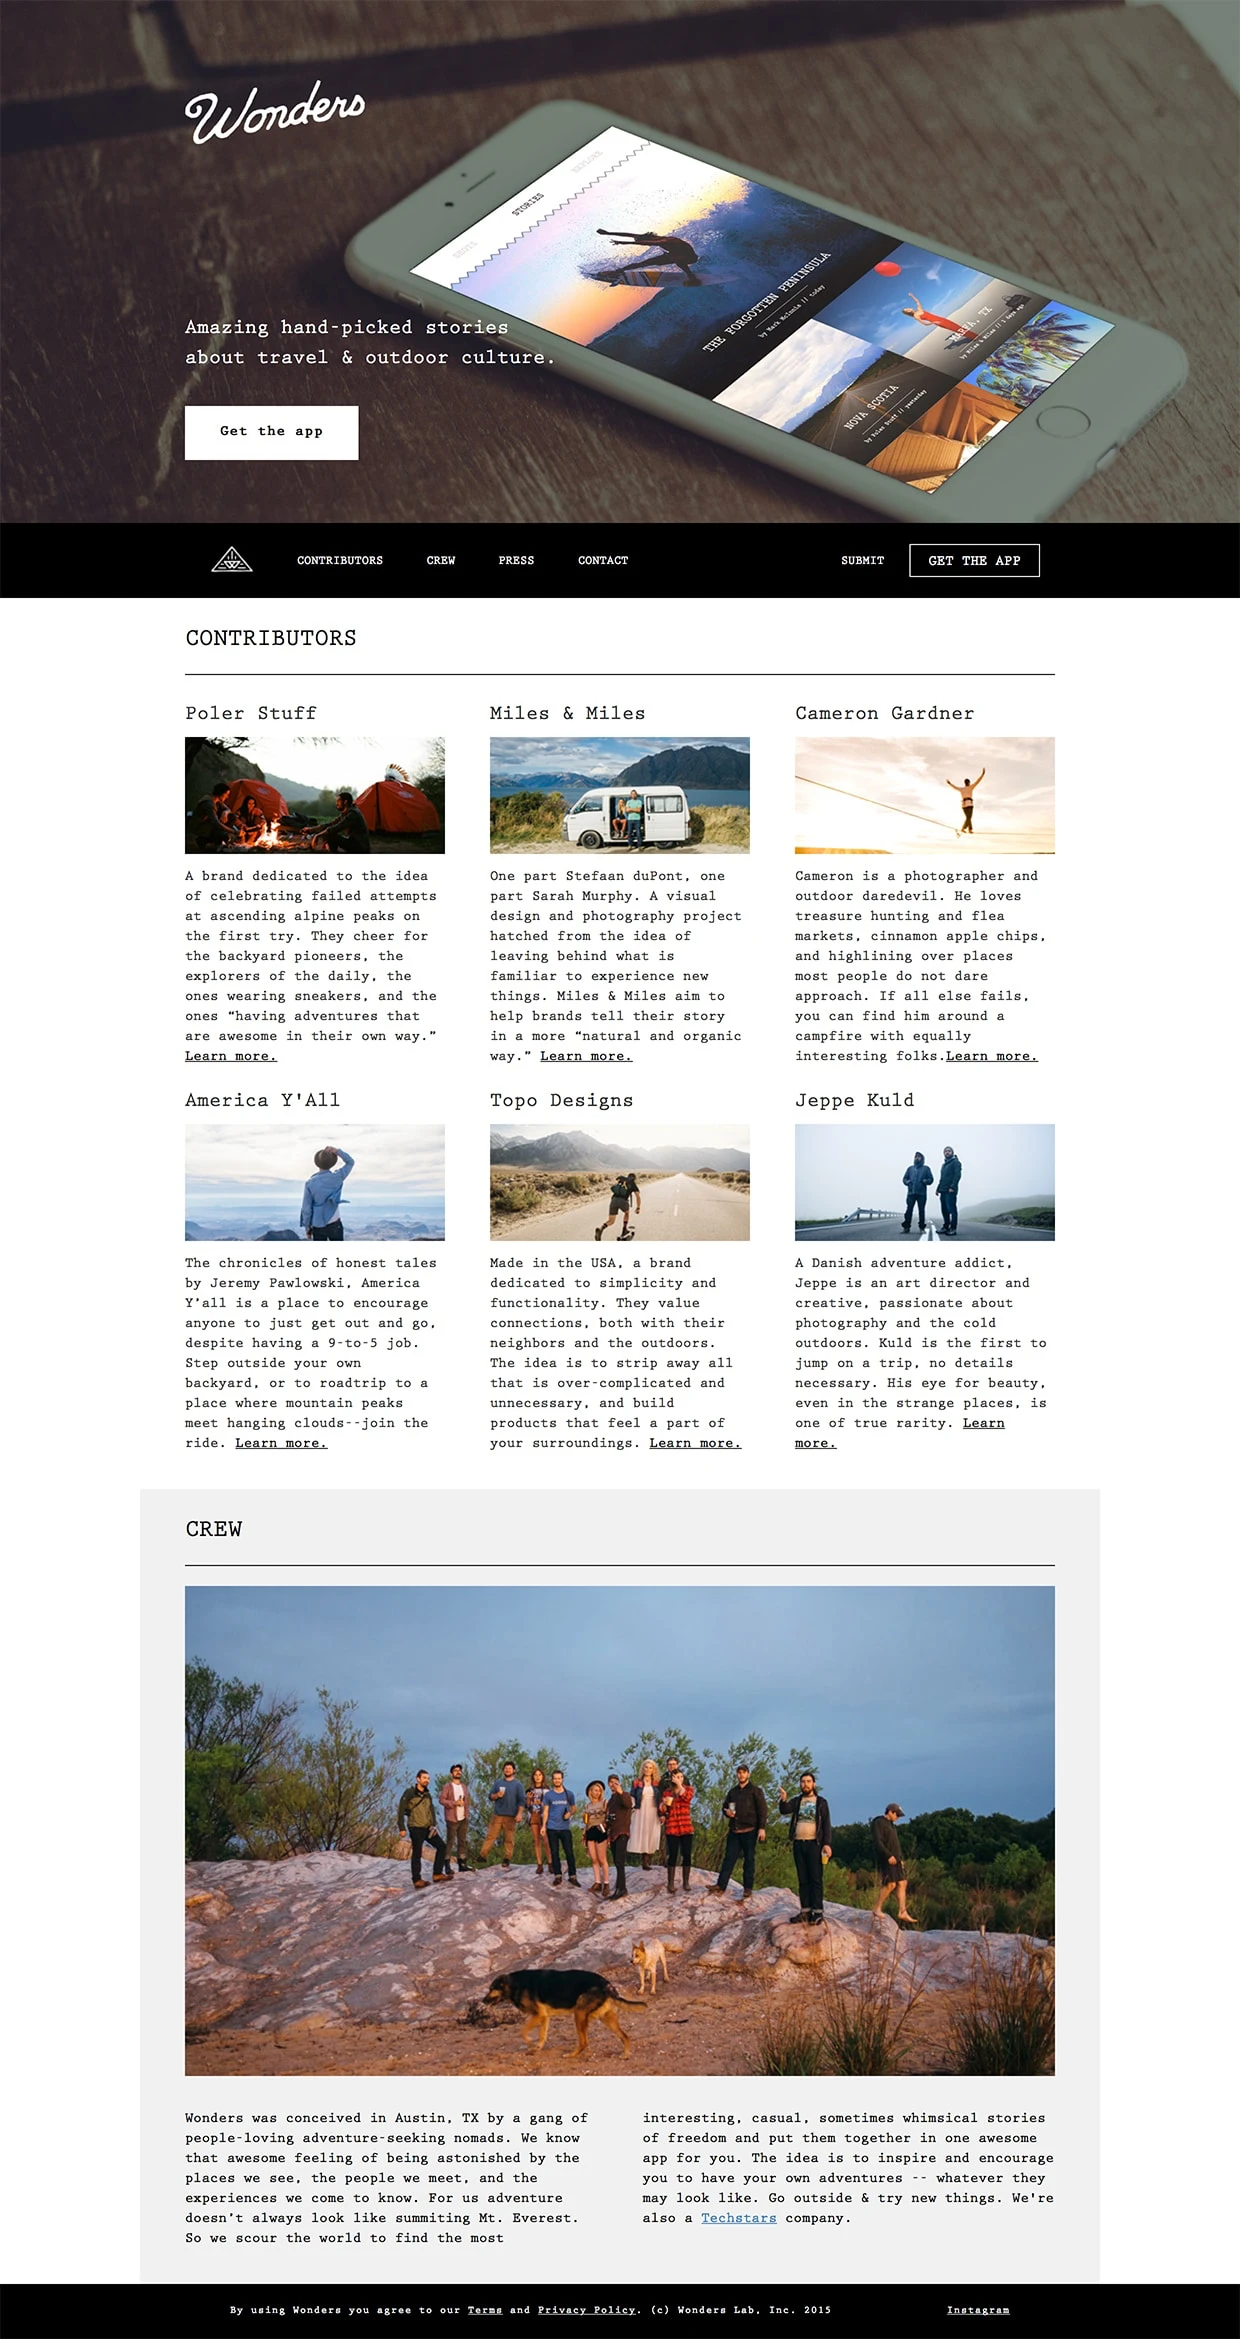 Wonders Landing Page Example: Amazing hand-picked stories about travel & outdoor culture